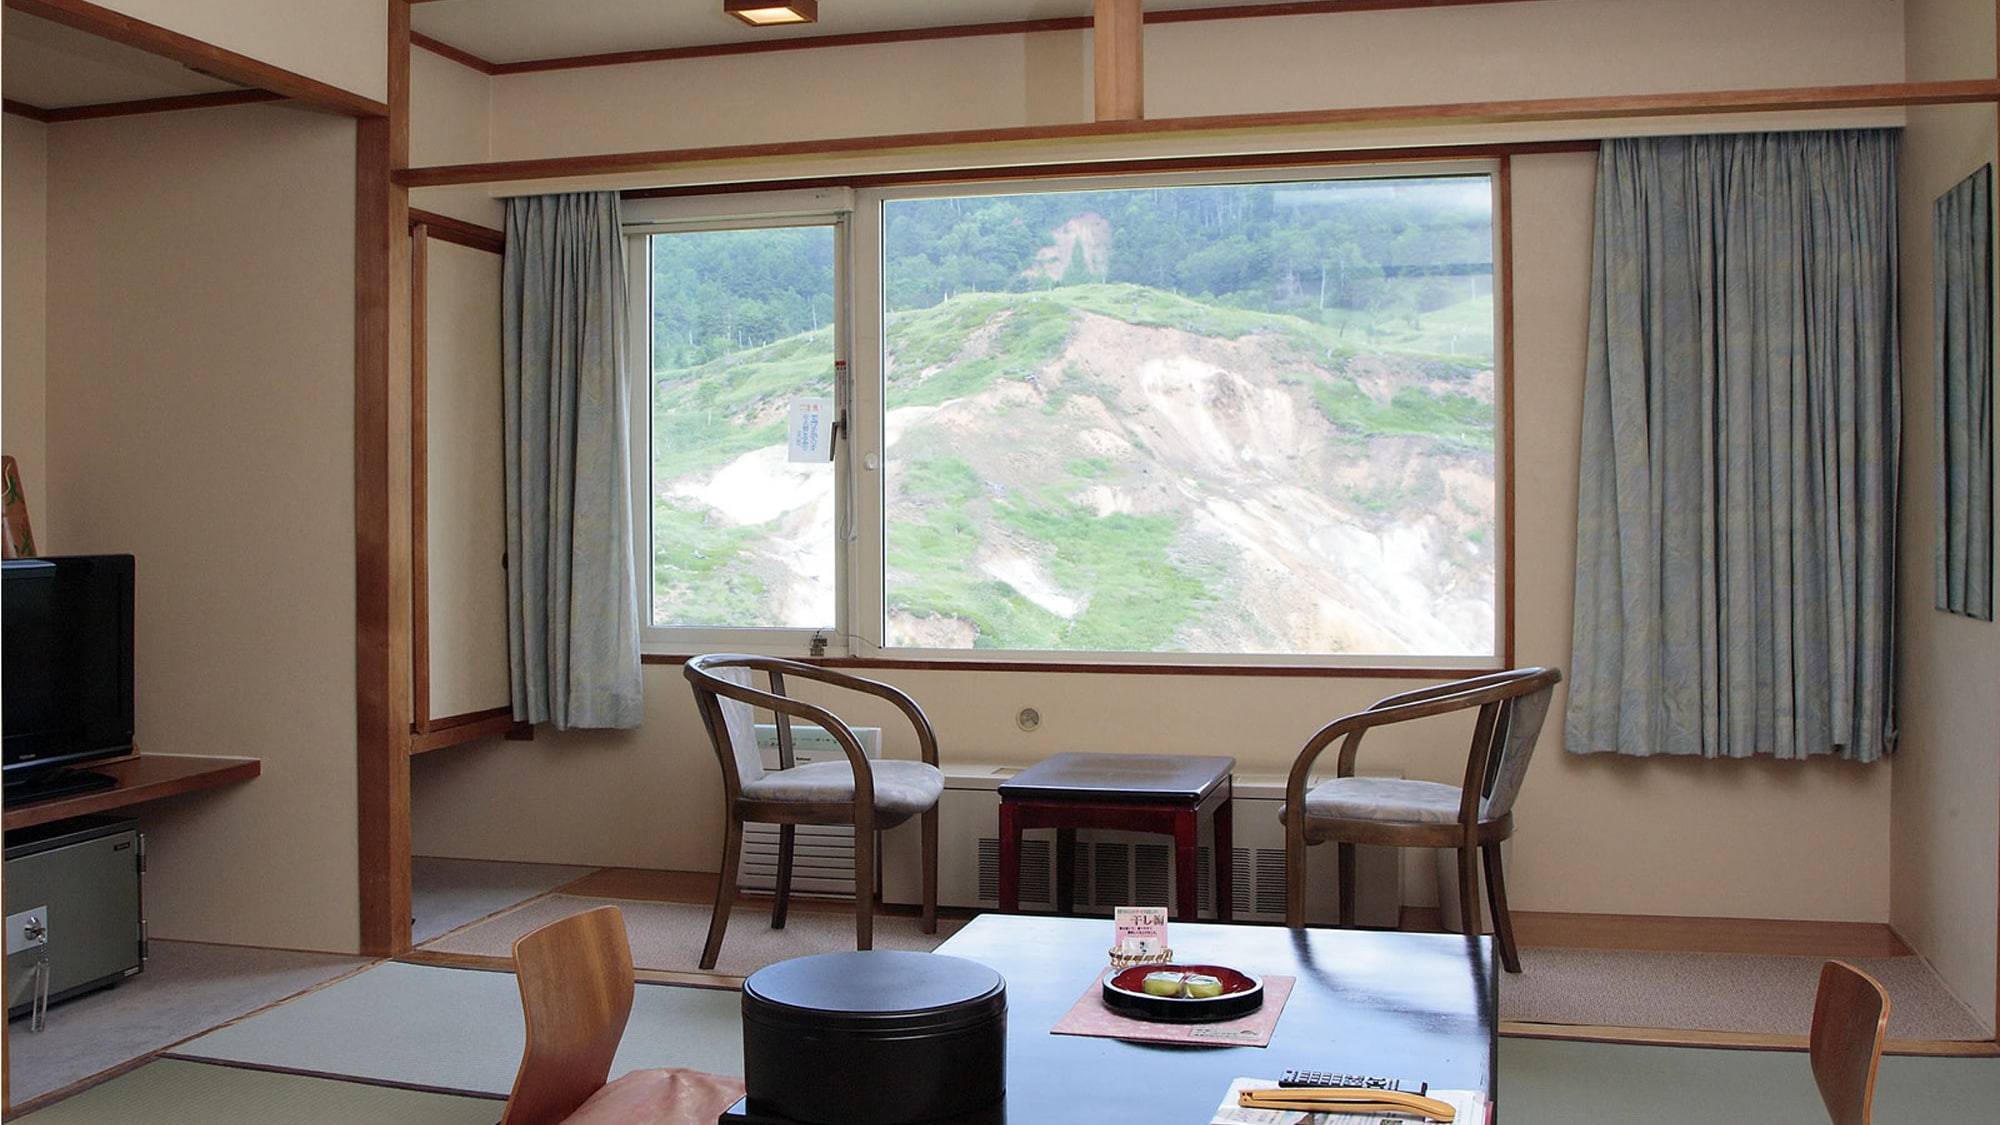 [Guest room] Japanese-style room with a superb view